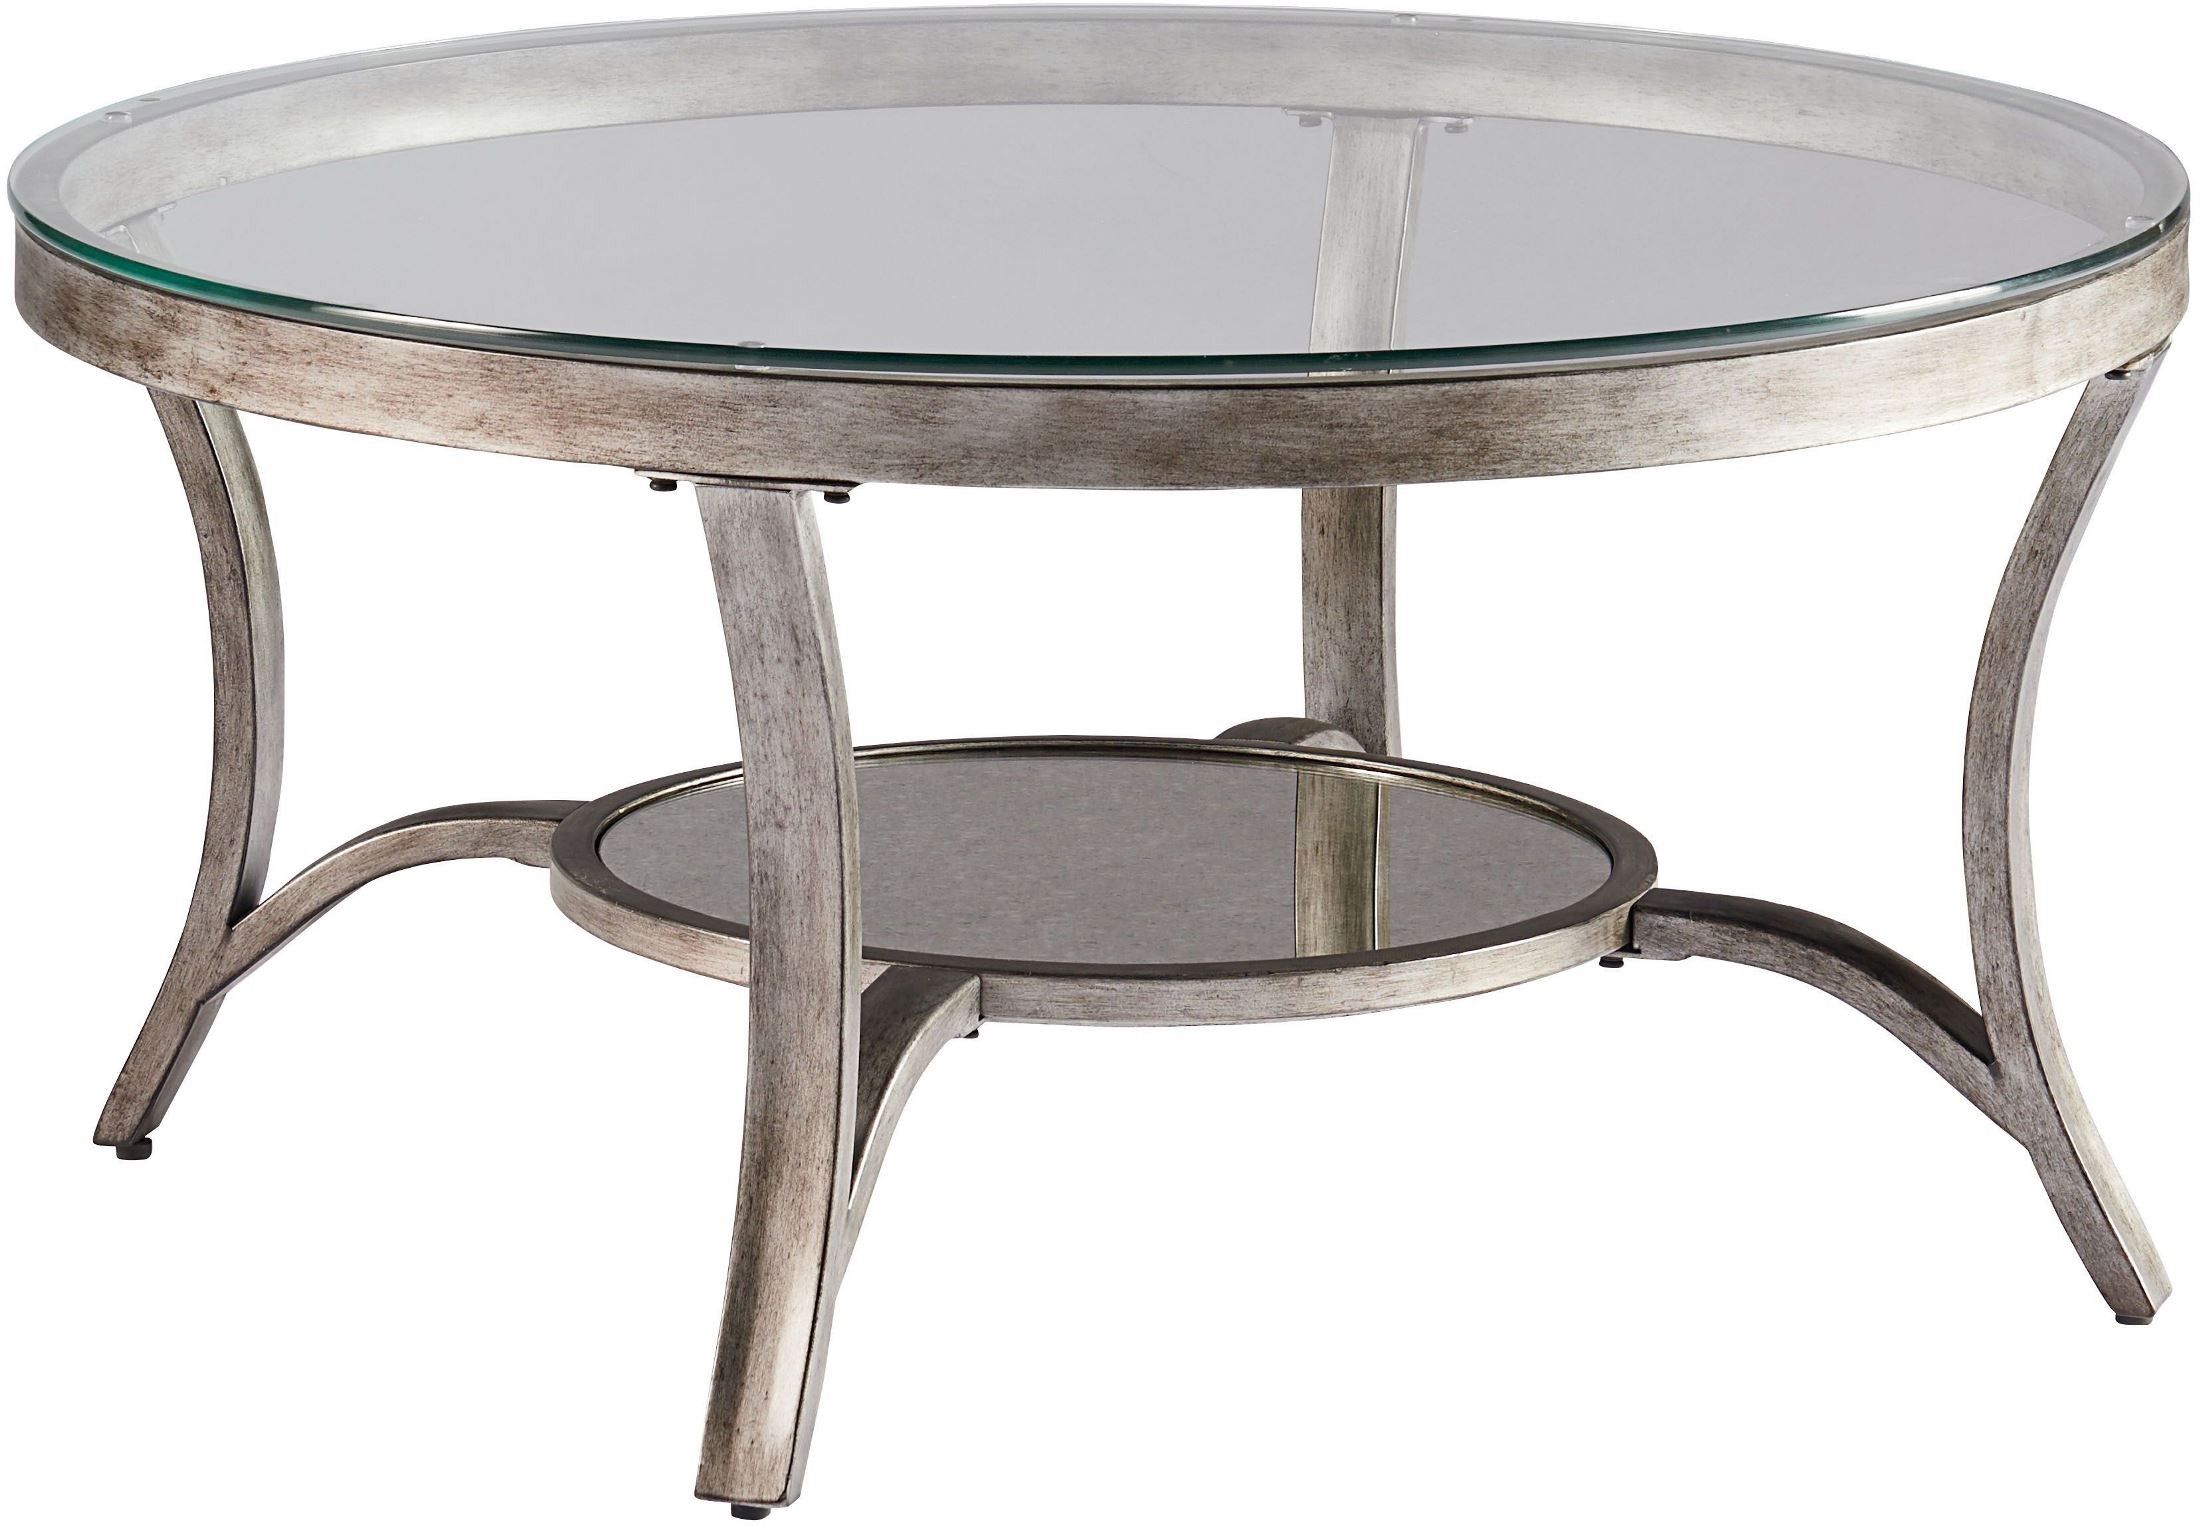 Cole Champagne Metal Cocktail Table From Standard Regarding Metallic Silver Cocktail Tables (View 11 of 15)